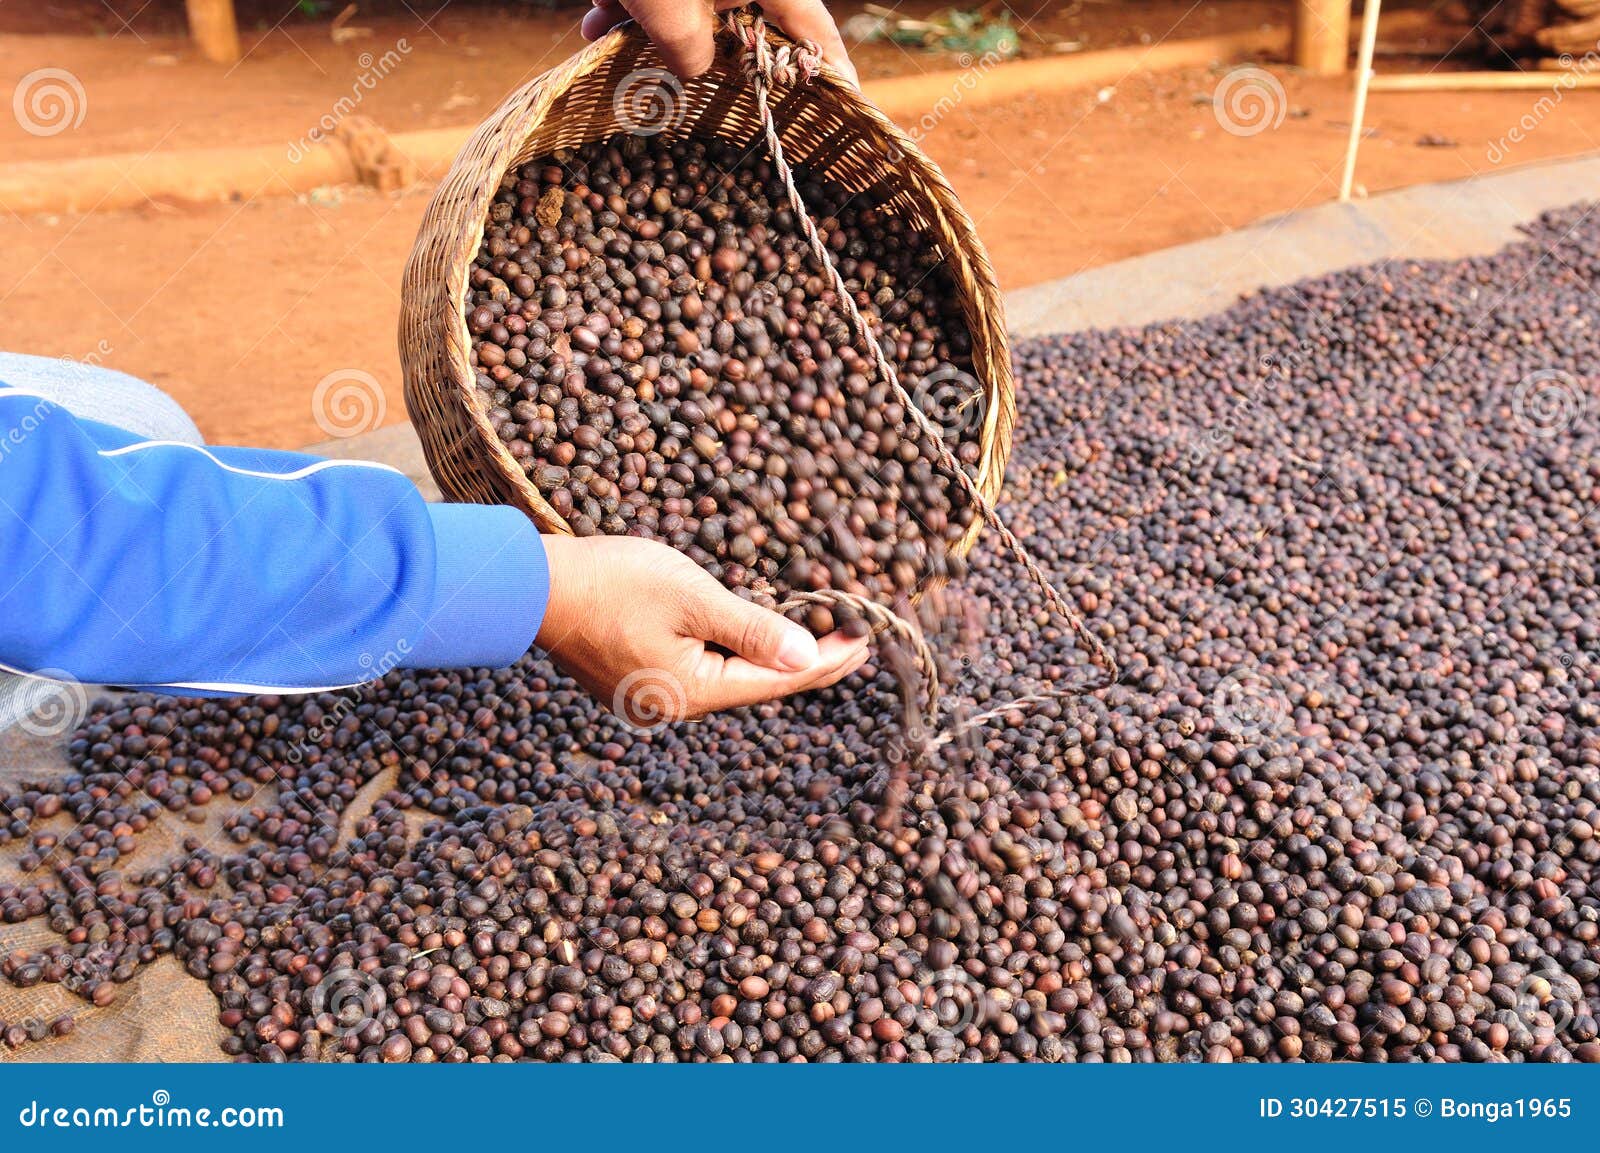 dried robusta coffee beans.